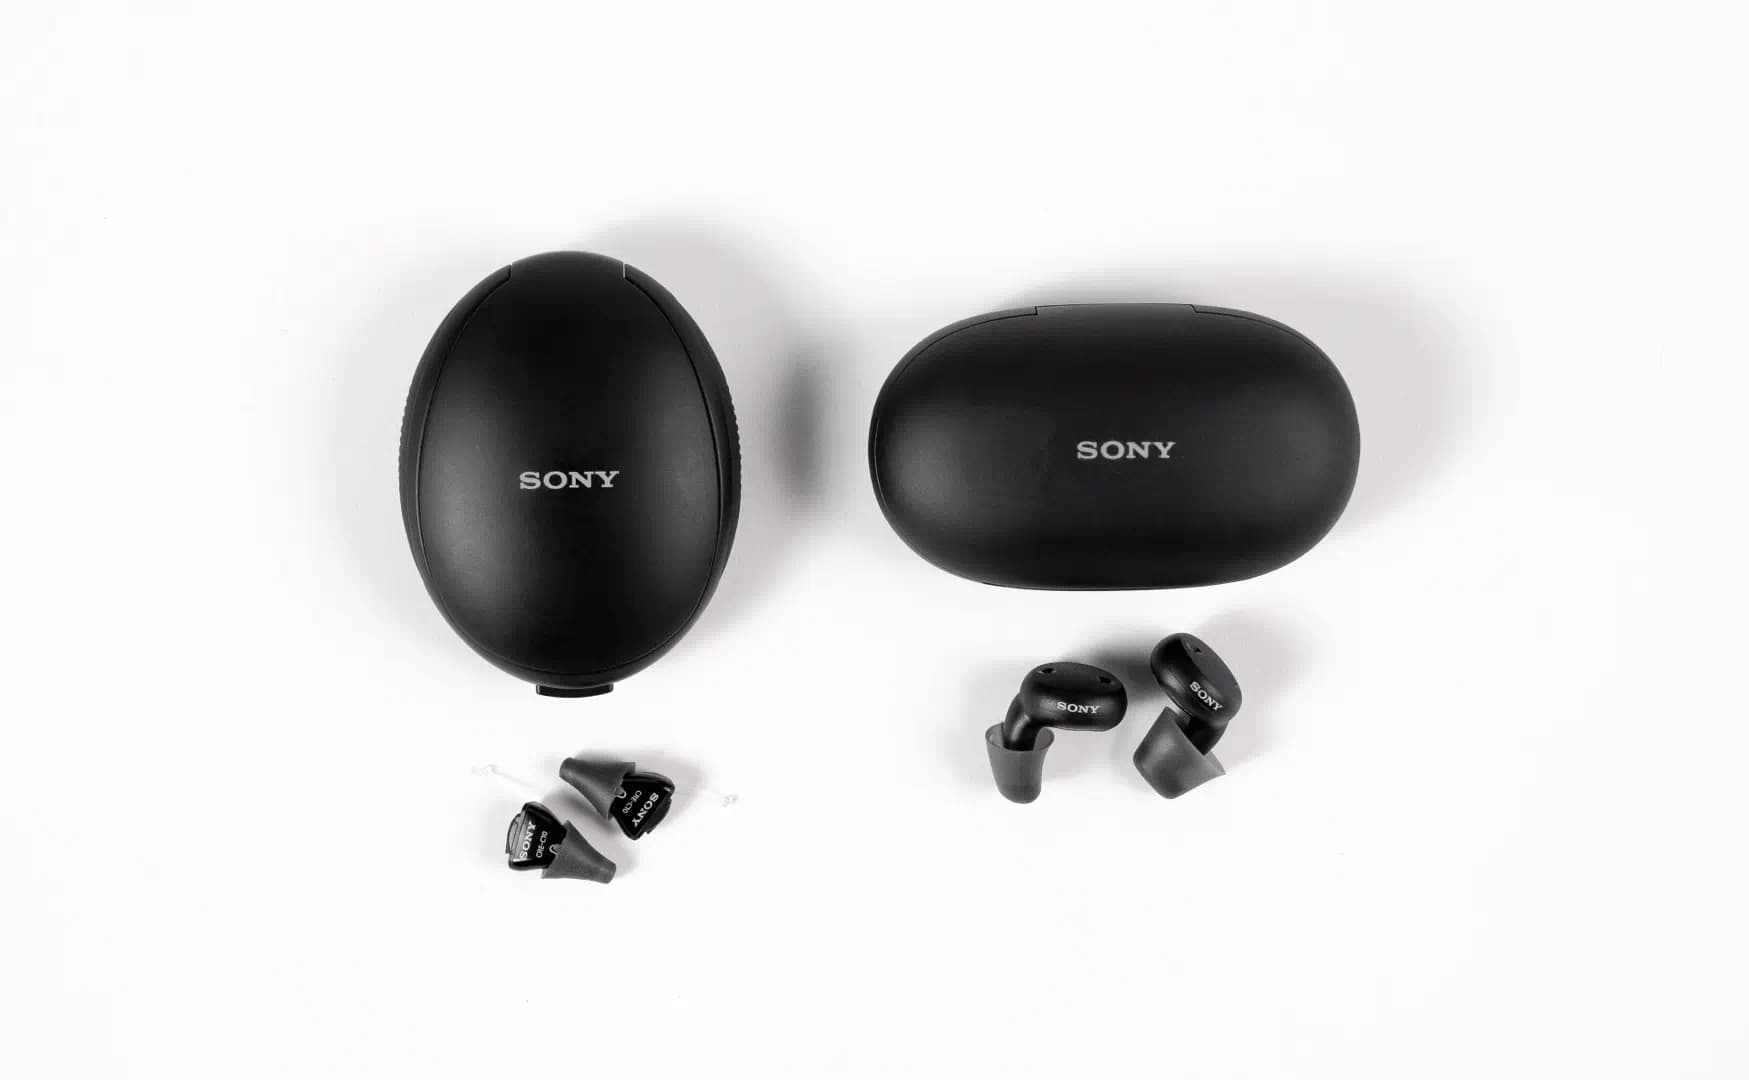 Sony's cre-c10 and e10 over-the-counter self-fitting hearing aids.  FDA-registred medical device for your safety.